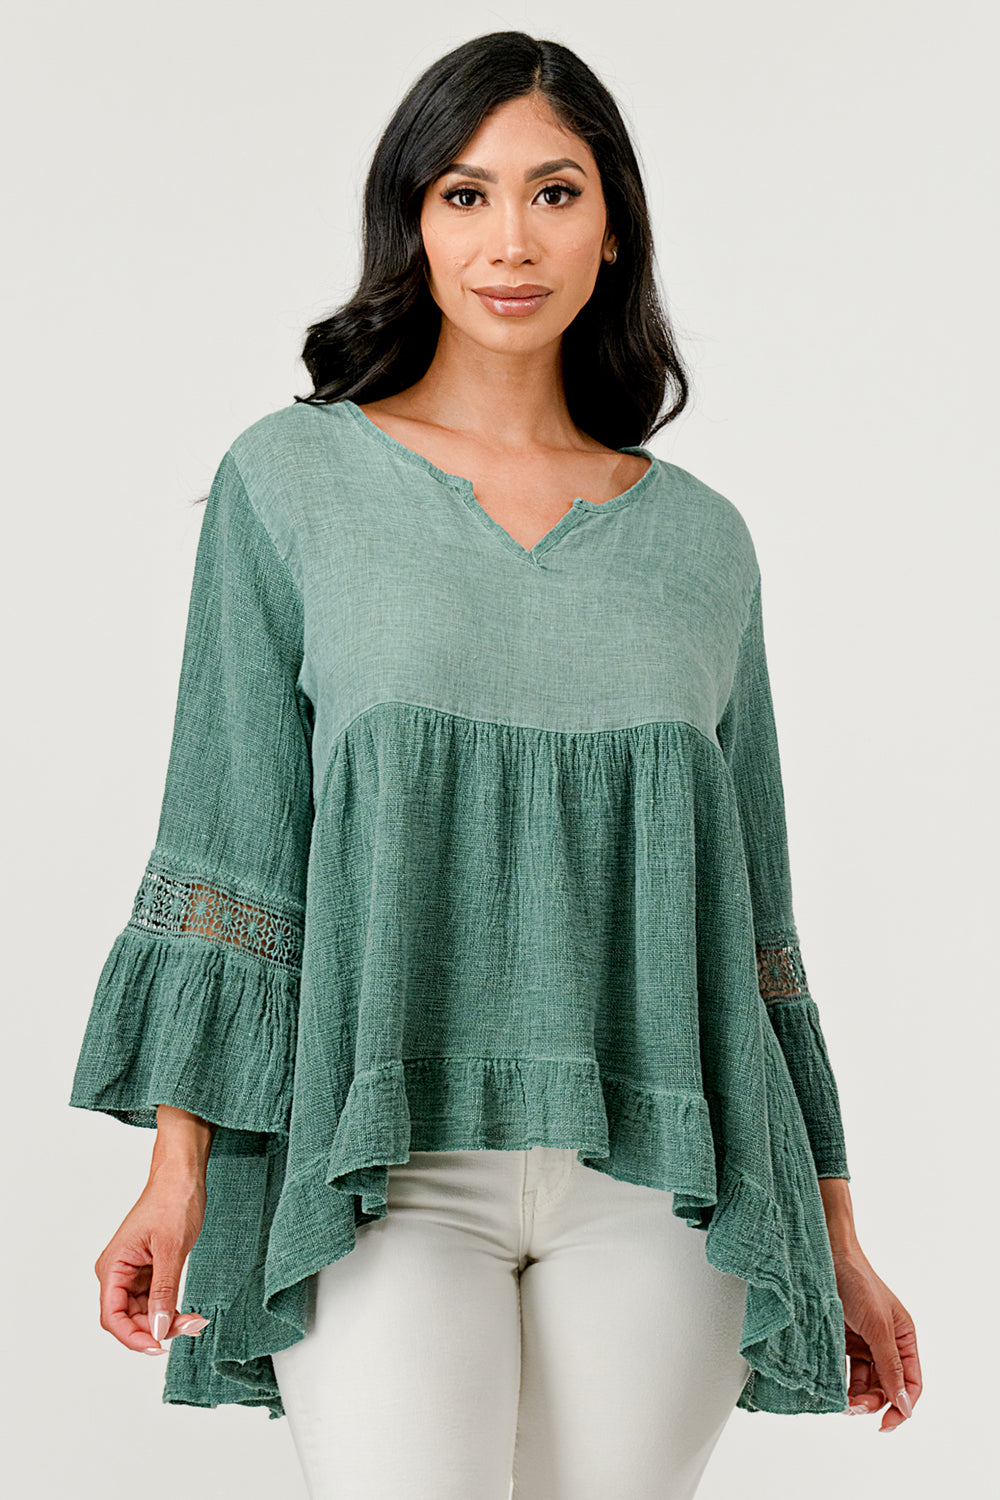 Raw Moda Lace Sleeves Linen Cotton Top